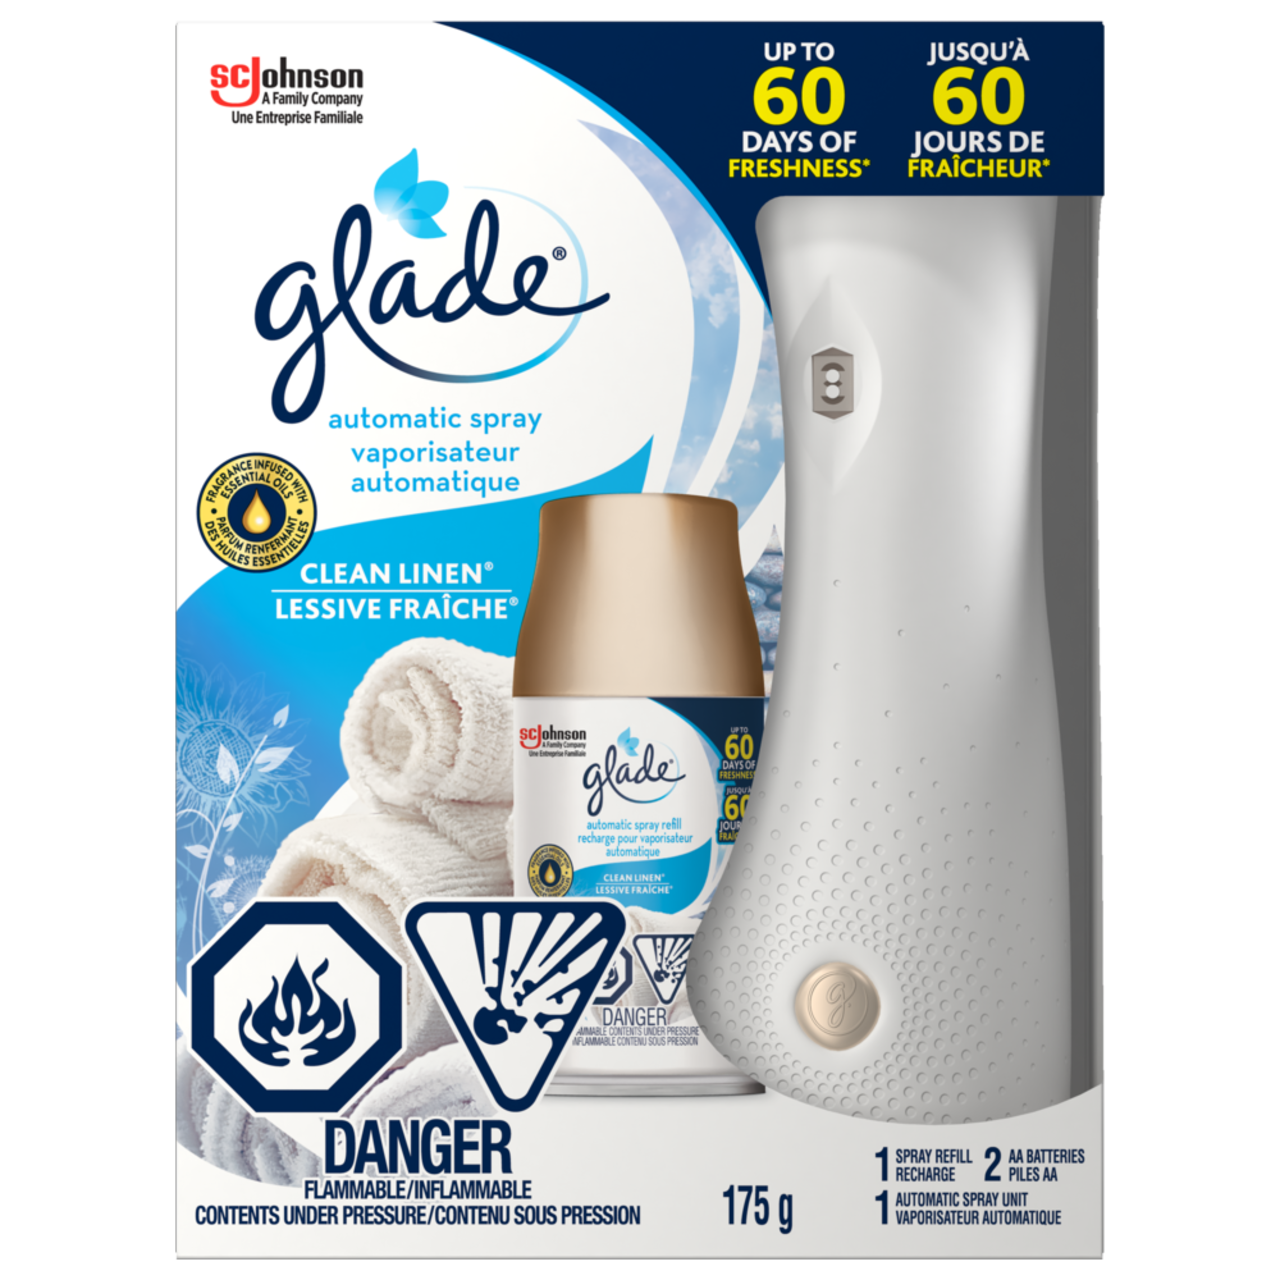 https://media-www.canadiantire.ca/product/living/cleaning/household-cleaning-solutions/0534238/glade-automatic-sprayholder-cleanlinen-75def862-6d9d-4e18-8ca0-76784727f7e0.png?imdensity=1&imwidth=640&impolicy=mZoom